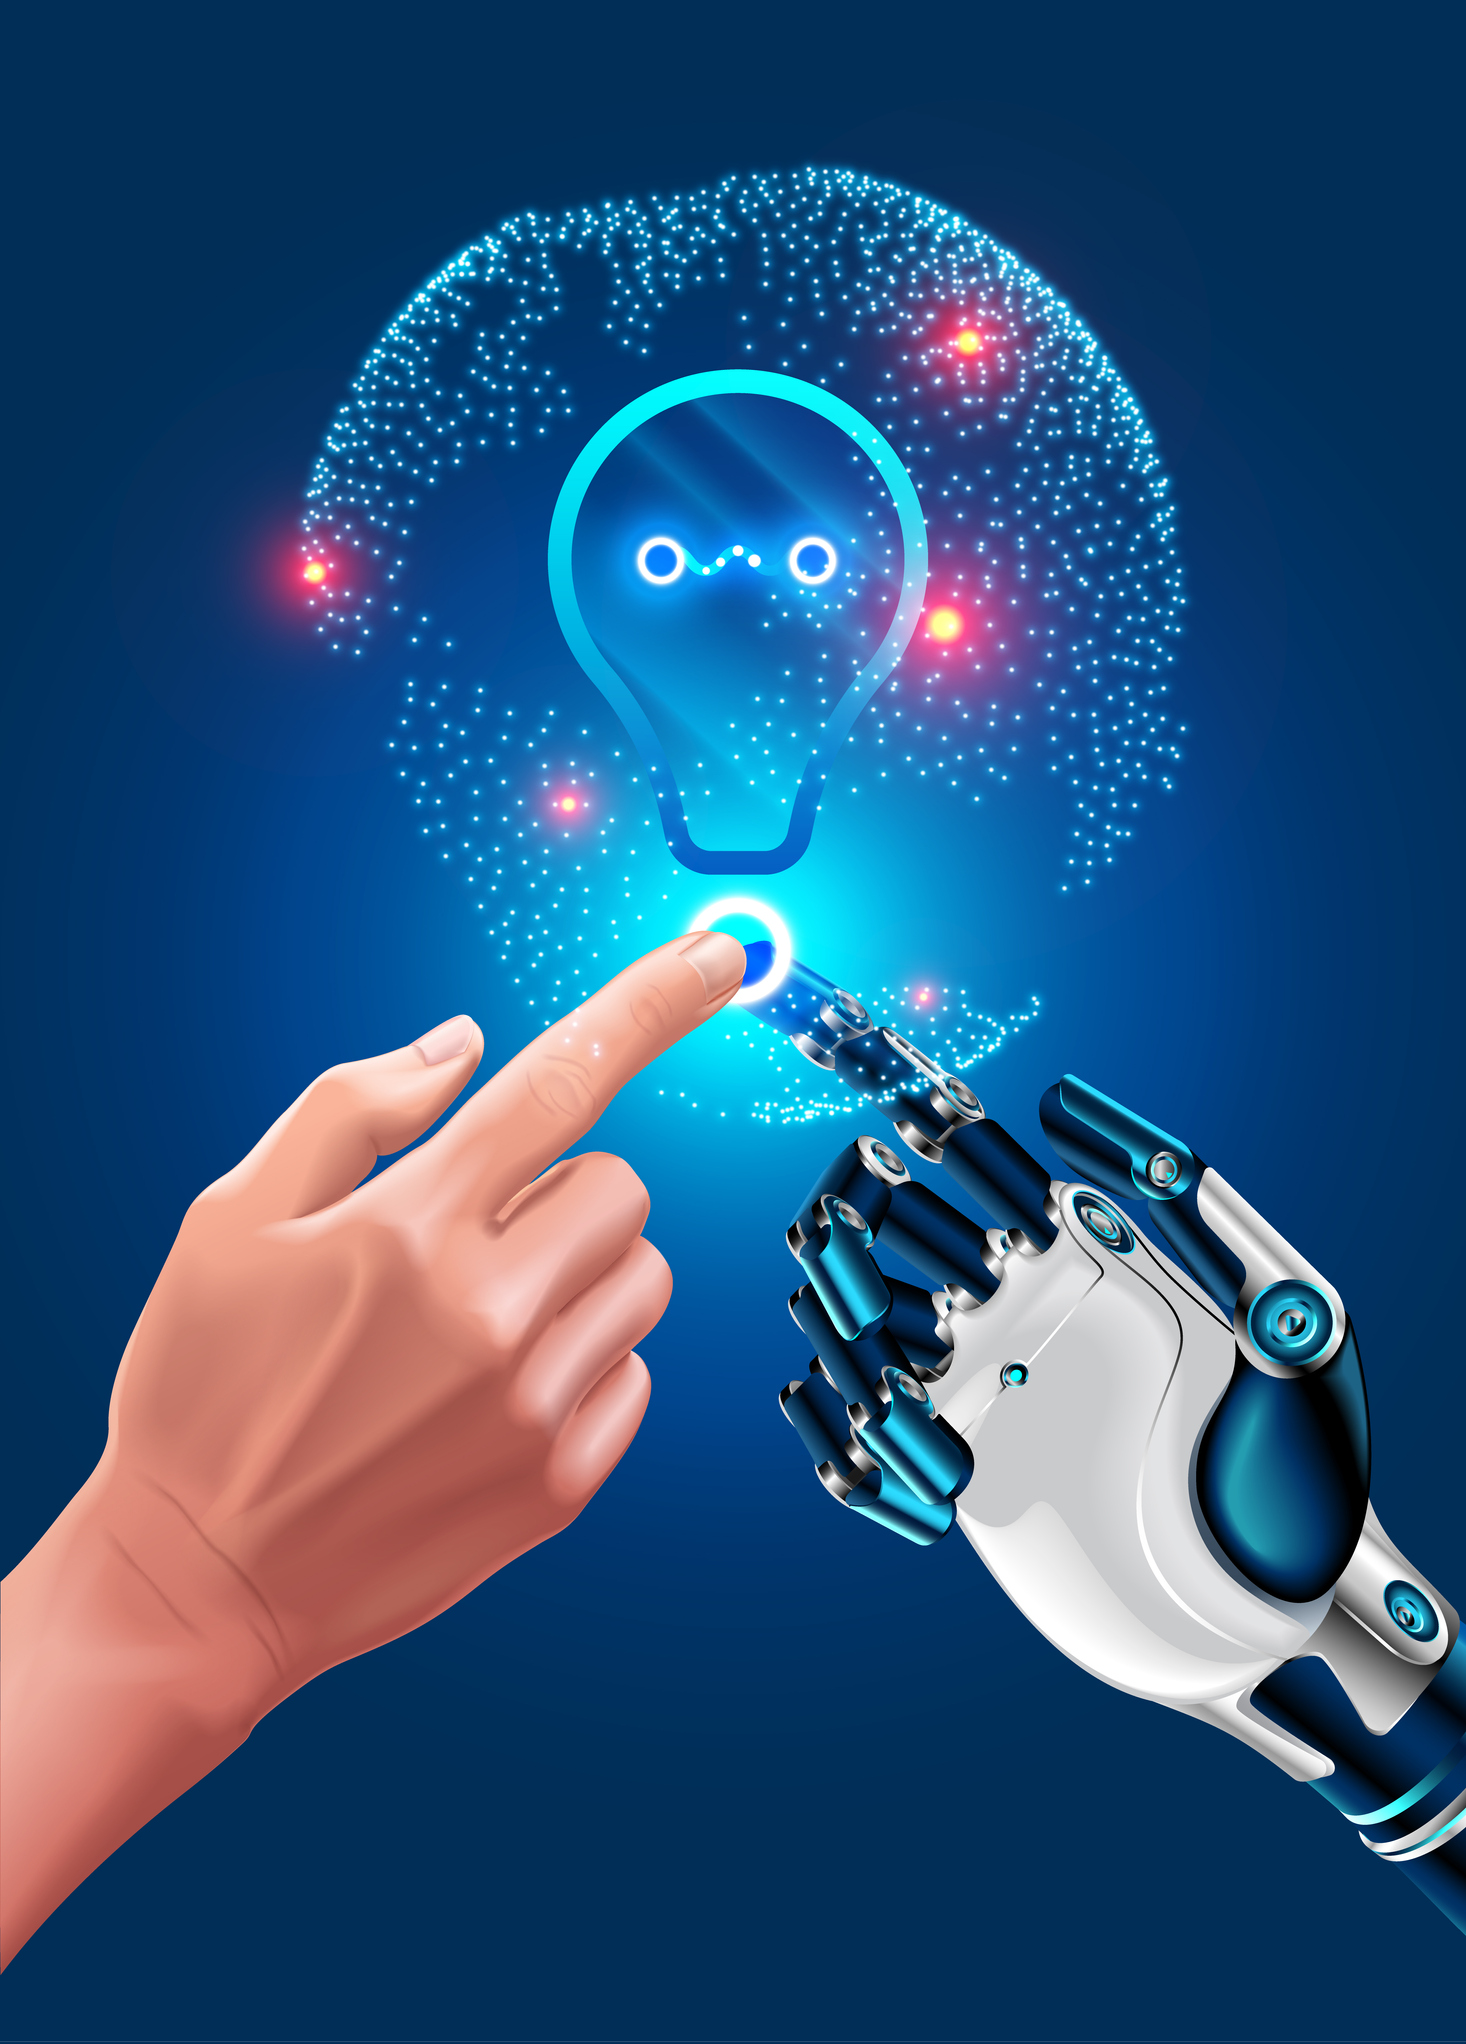 Human hand touches robot hand. Illustration about modern Innovation in industry. Global automation, ai in business. Friendship of artificial intelligence and man. New ideas in optimization business.